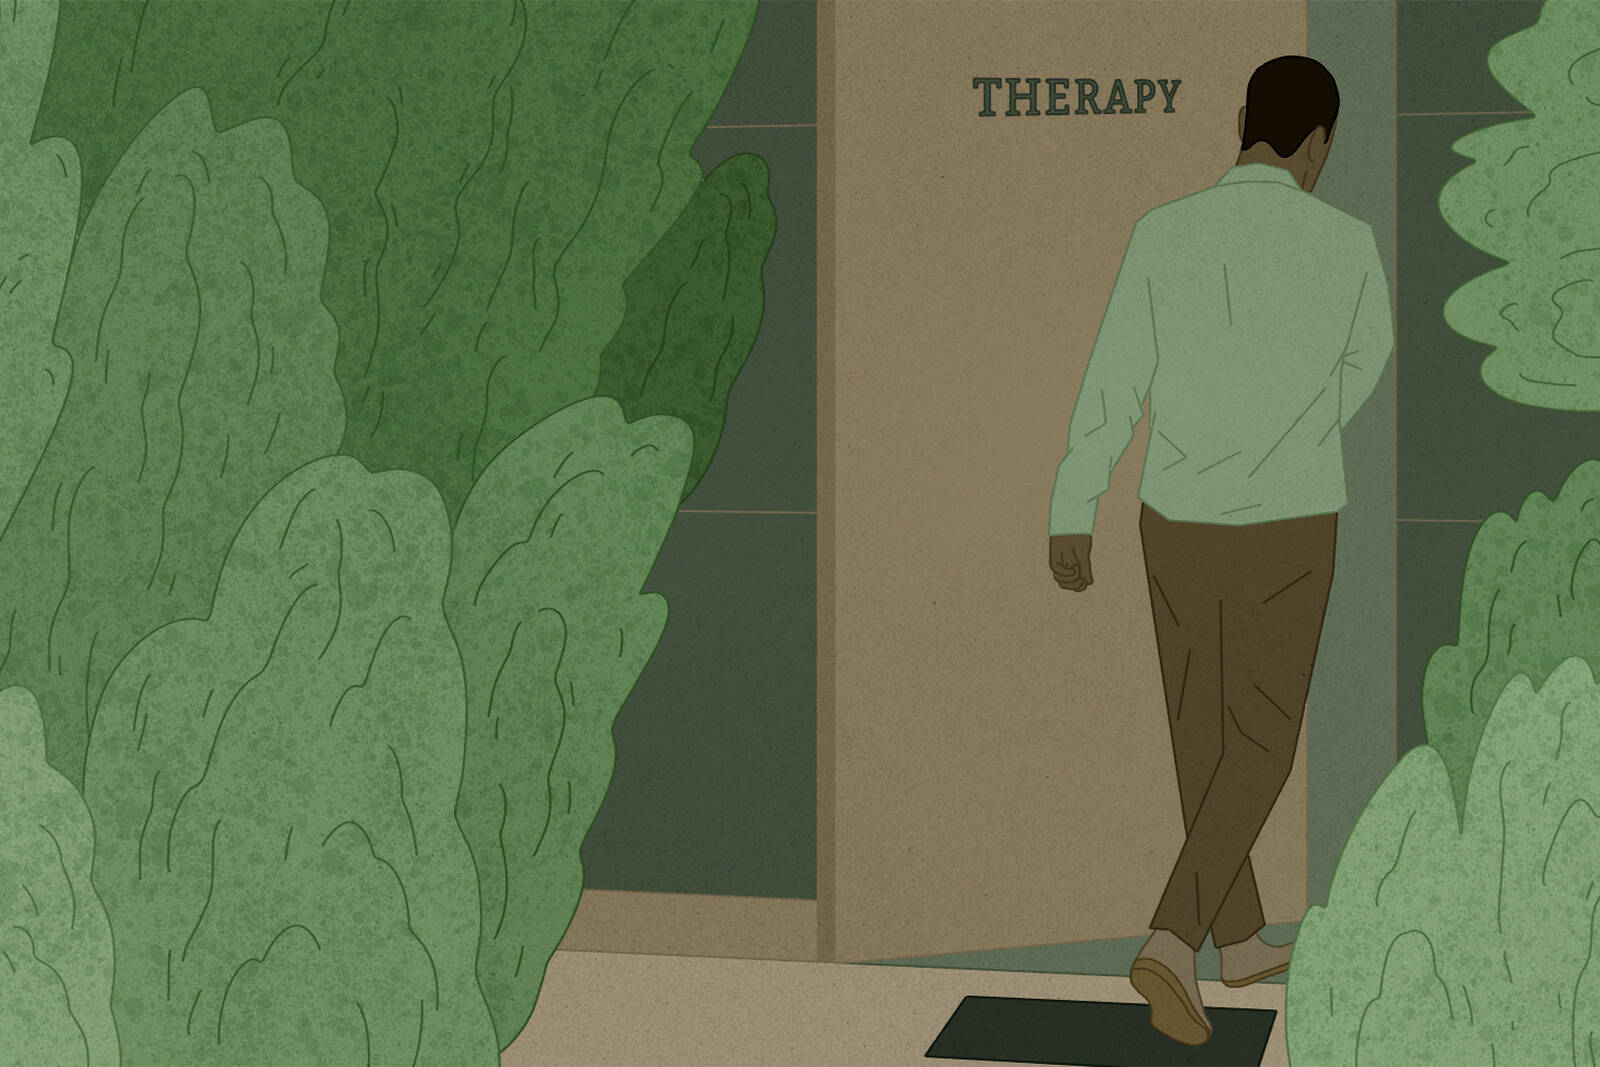 A man walks into a therapy room.